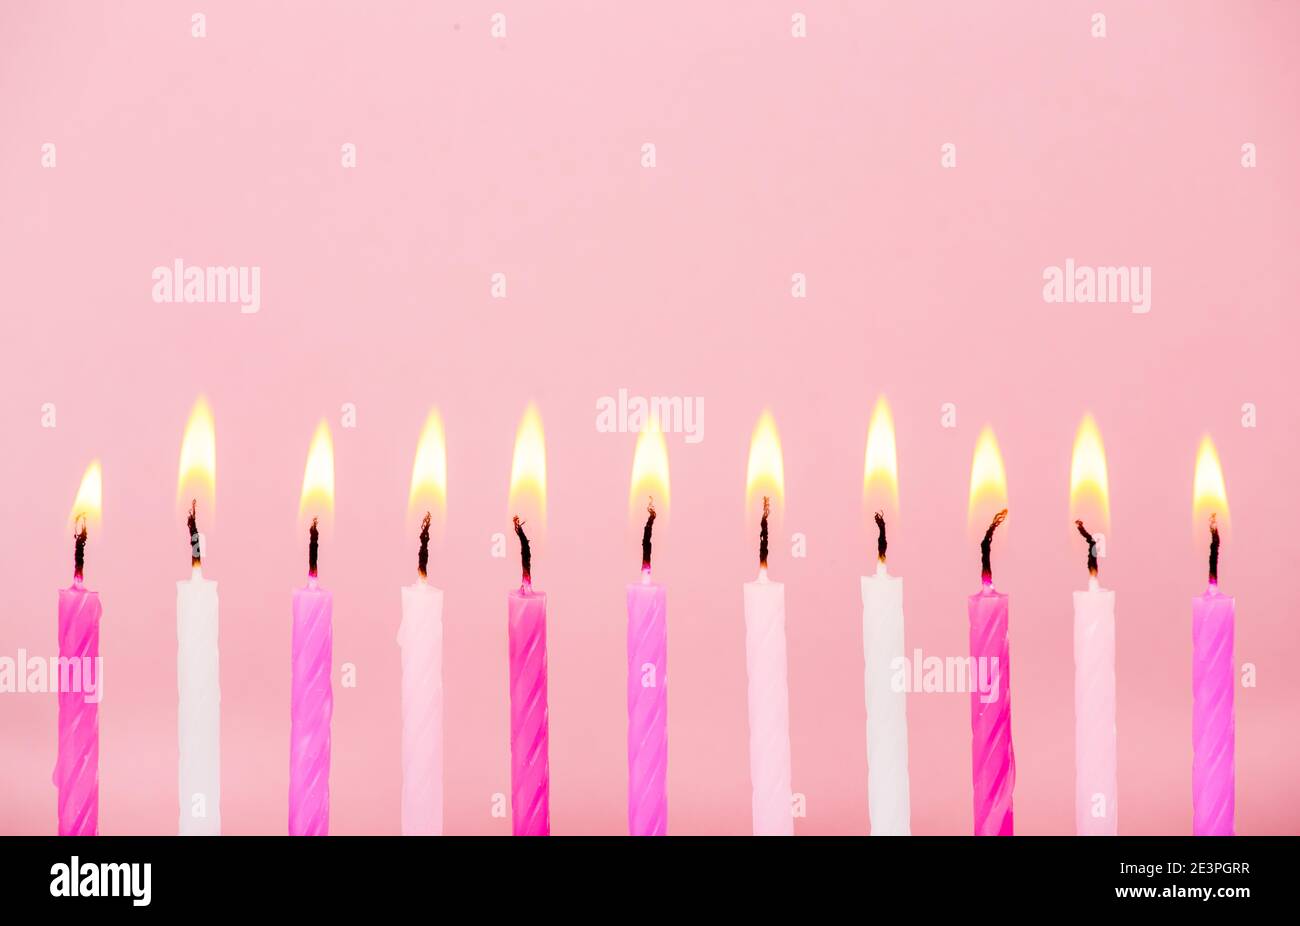 Various pink color birthday cake candles burning in line on pastel pink background, studio shot, lot of copy space for greetings. Side view. Stock Photo